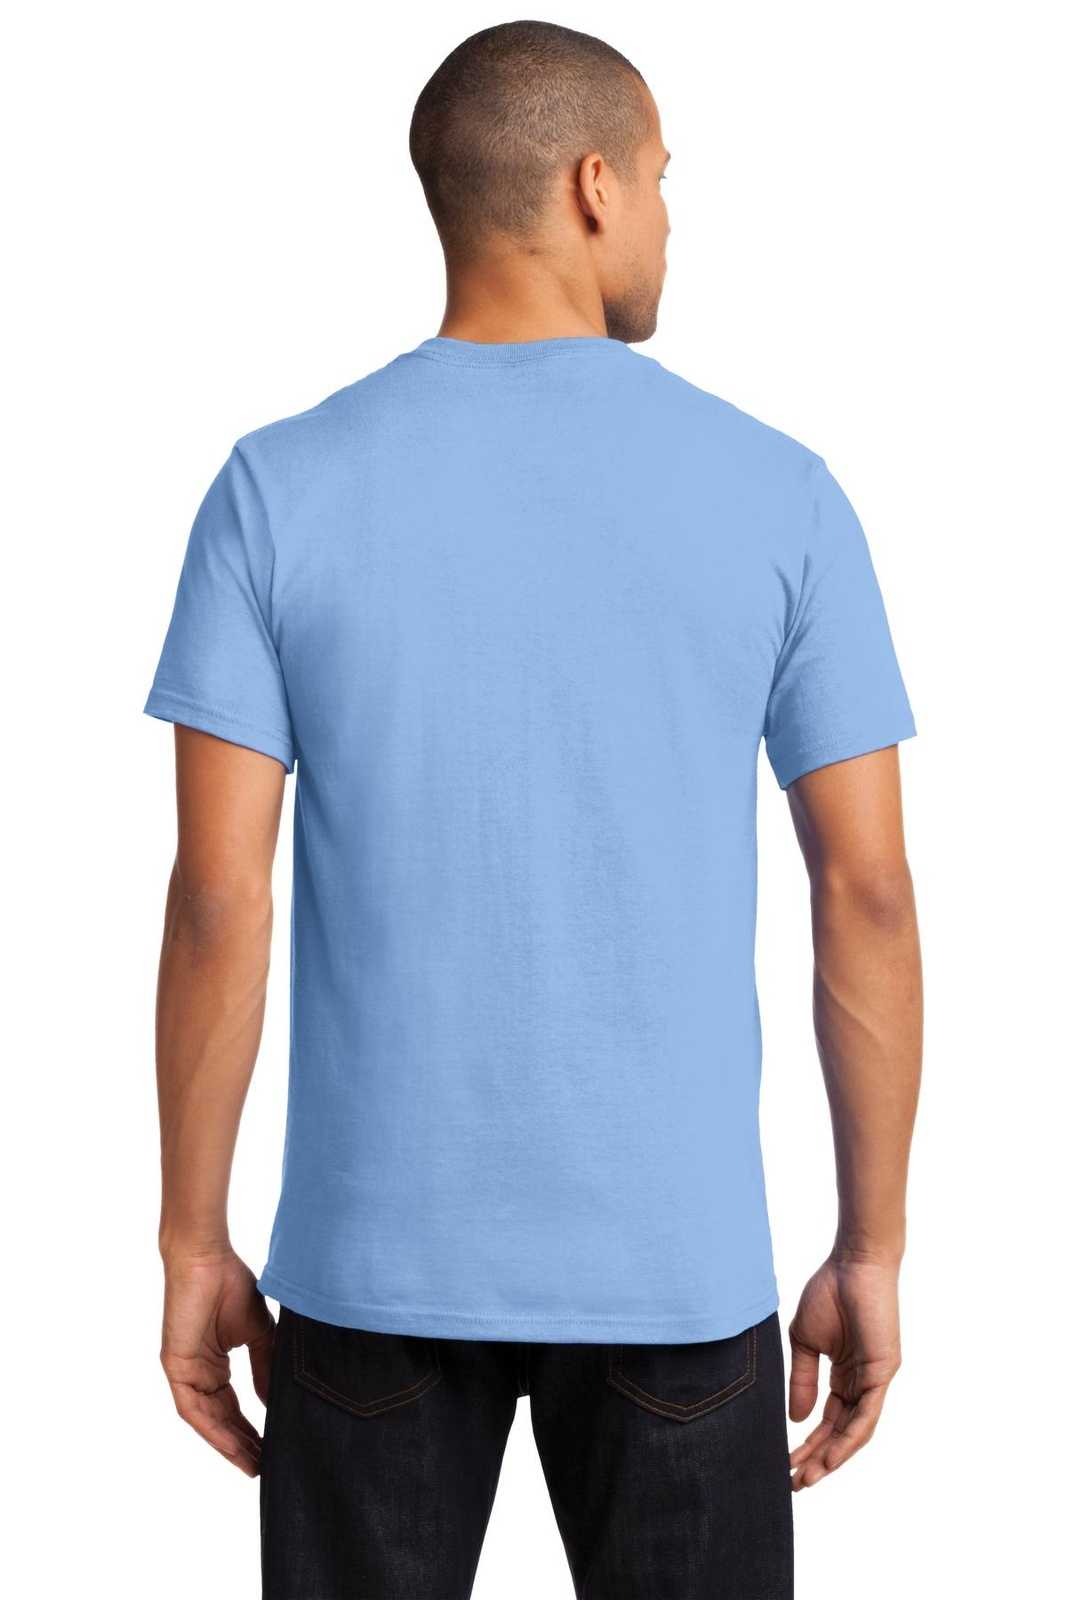 Port & Company PC61P Essential Pocket Tee - Light Blue - HIT a Double - 1